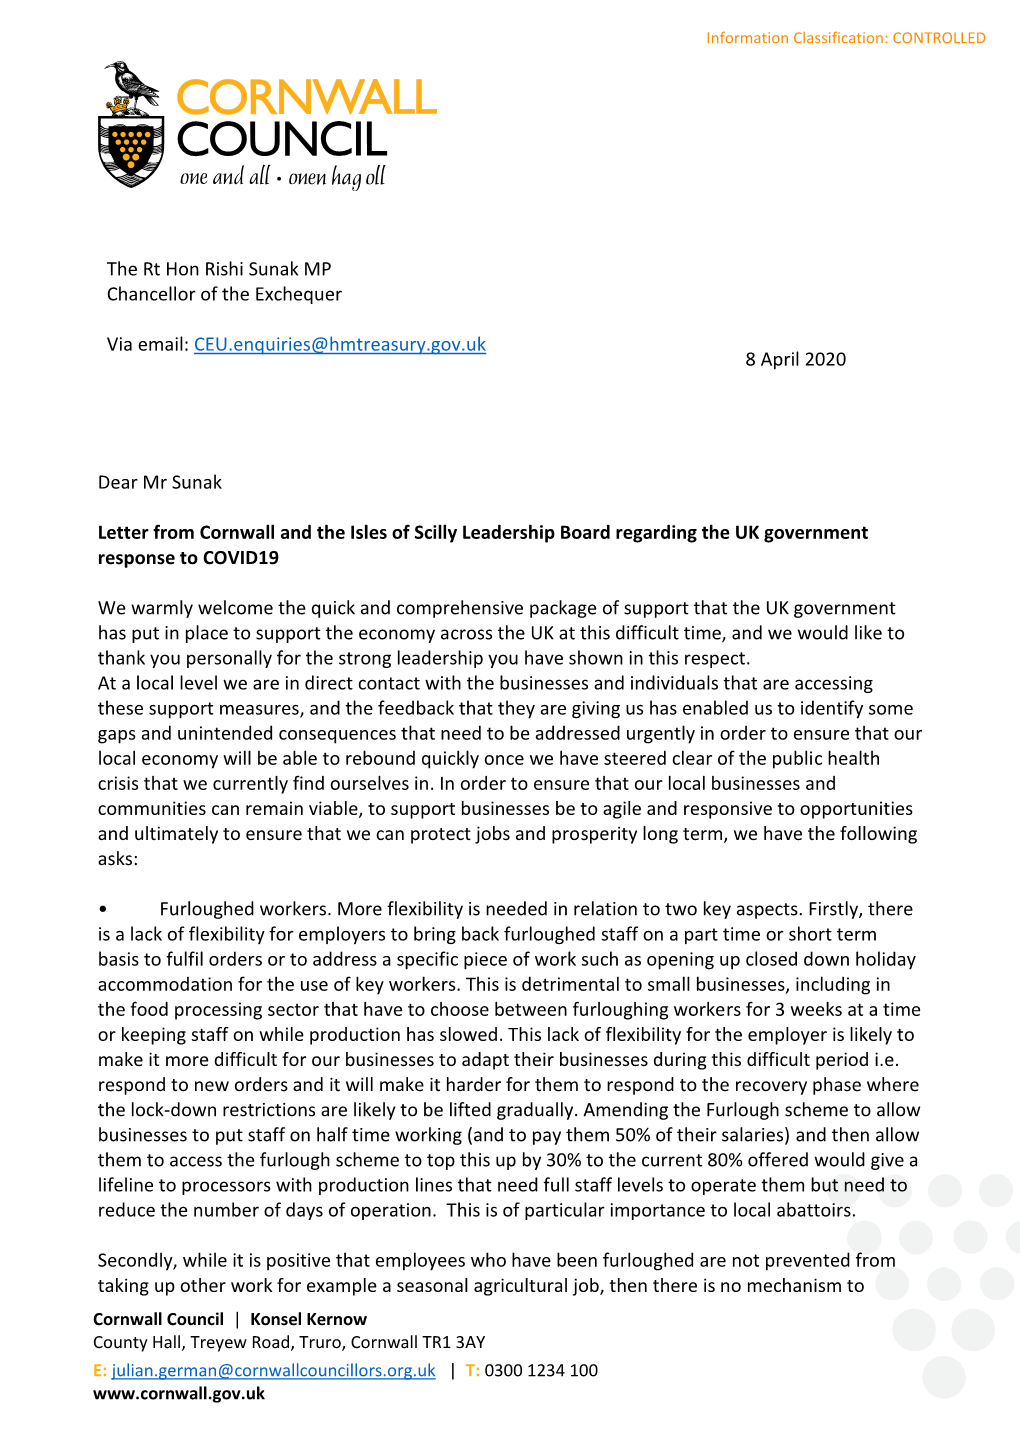 Dear Mr Sunak Letter from Cornwall and the Isles of Scilly Leadership